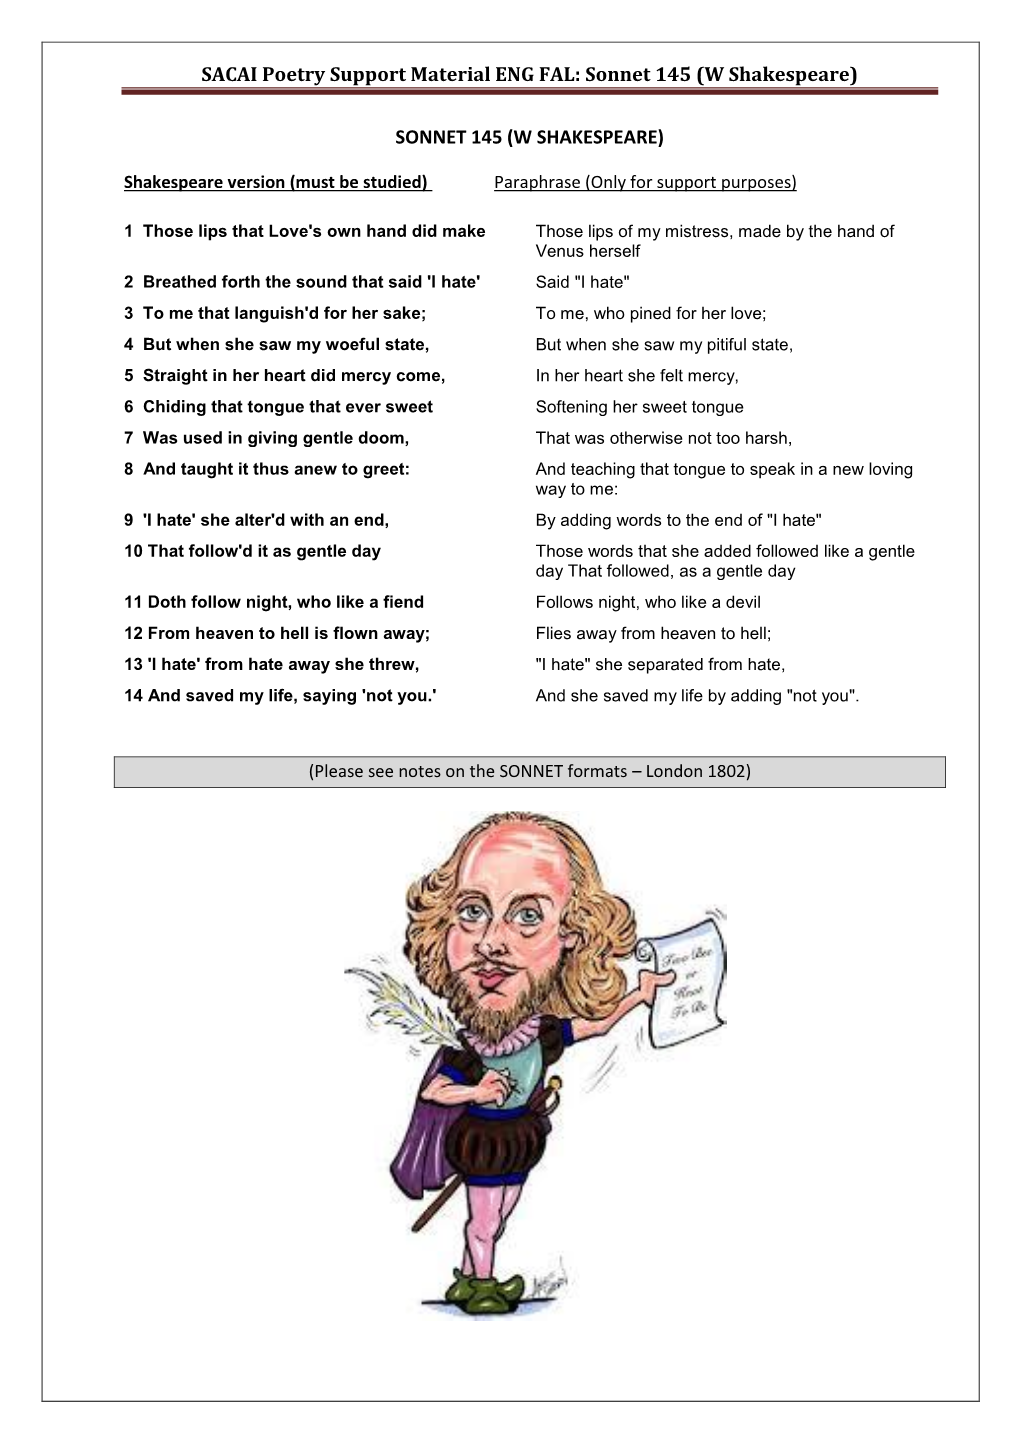 SACAI Poetry Support Material ENG FAL: Sonnet 145 (W Shakespeare)